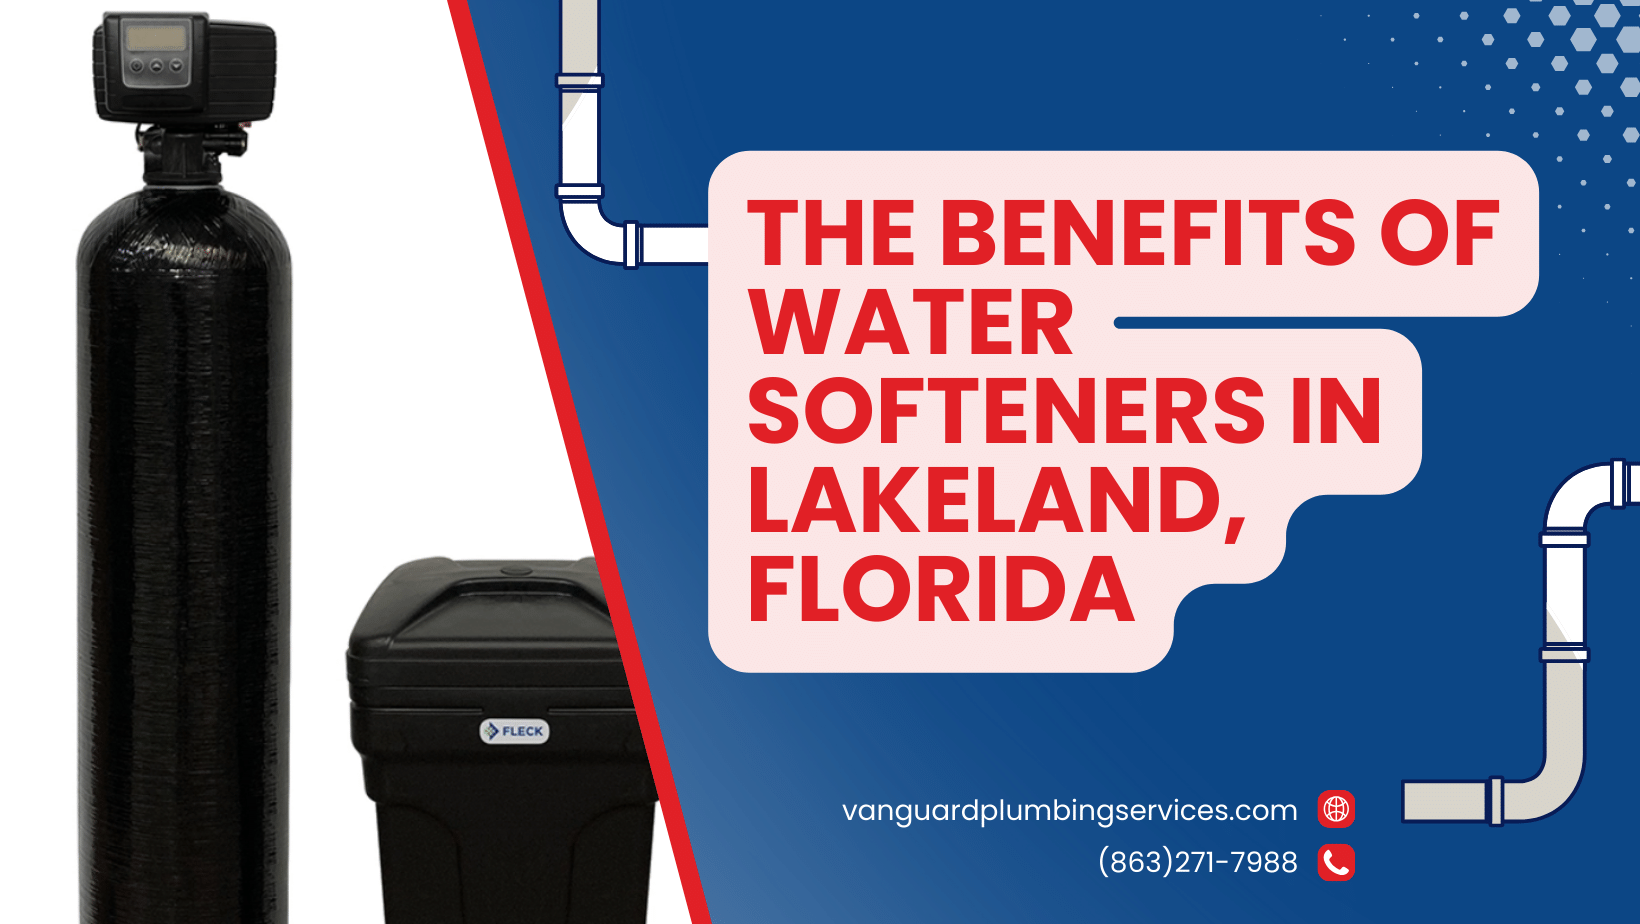 The Benefits of Water Softeners in Lakeland, Florida